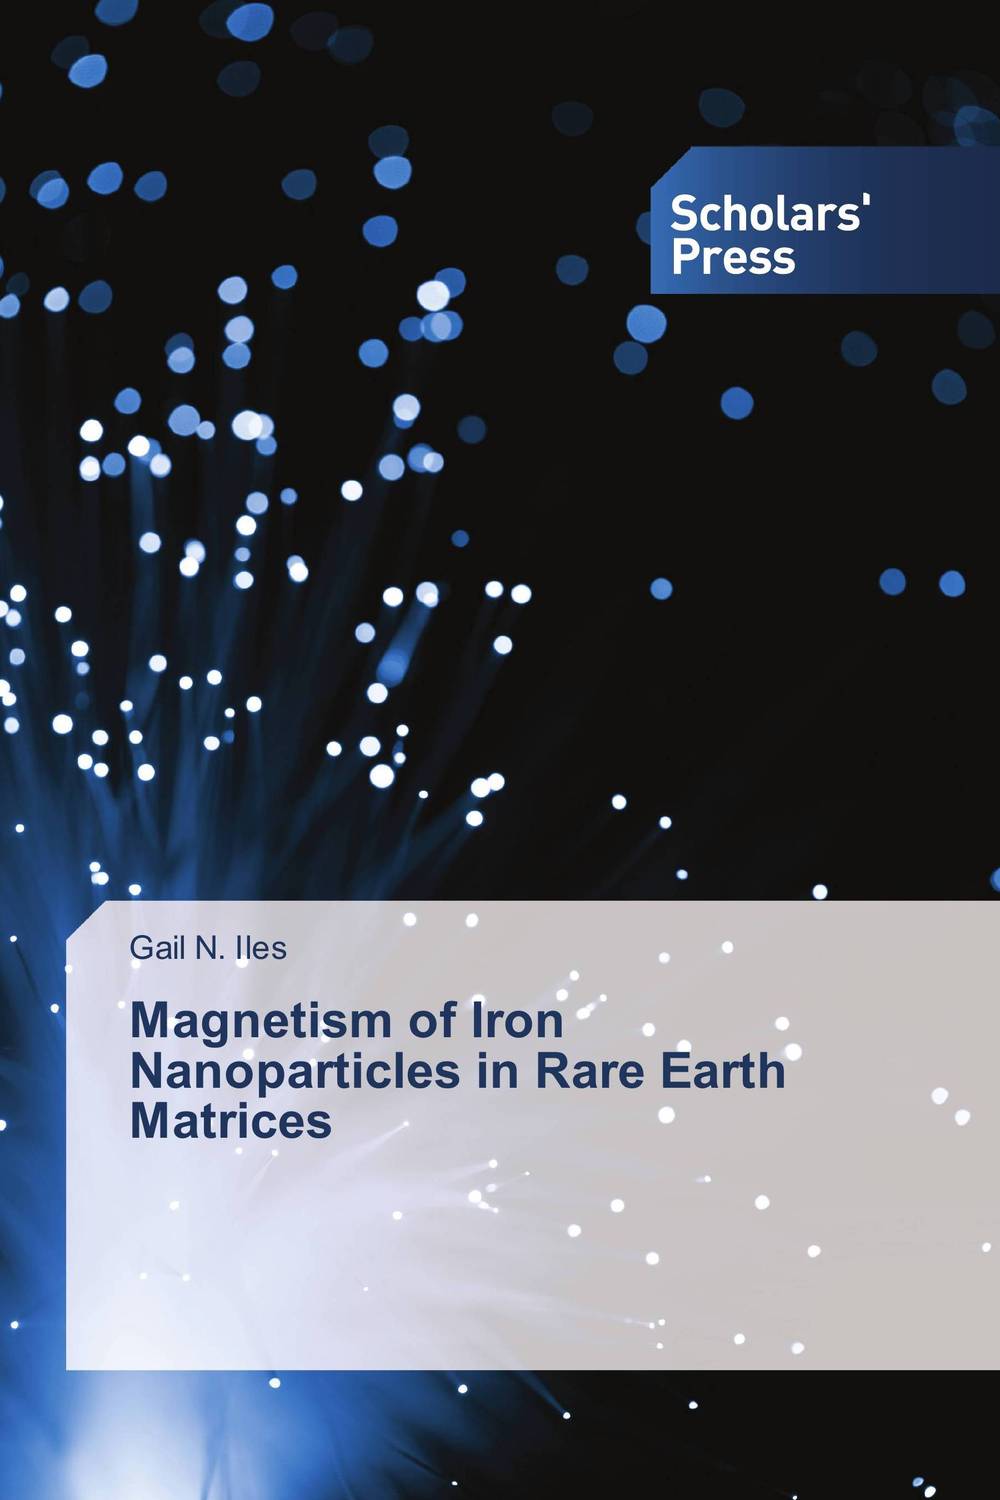 Magnetism of Iron Nanoparticles in Rare Earth Matrices